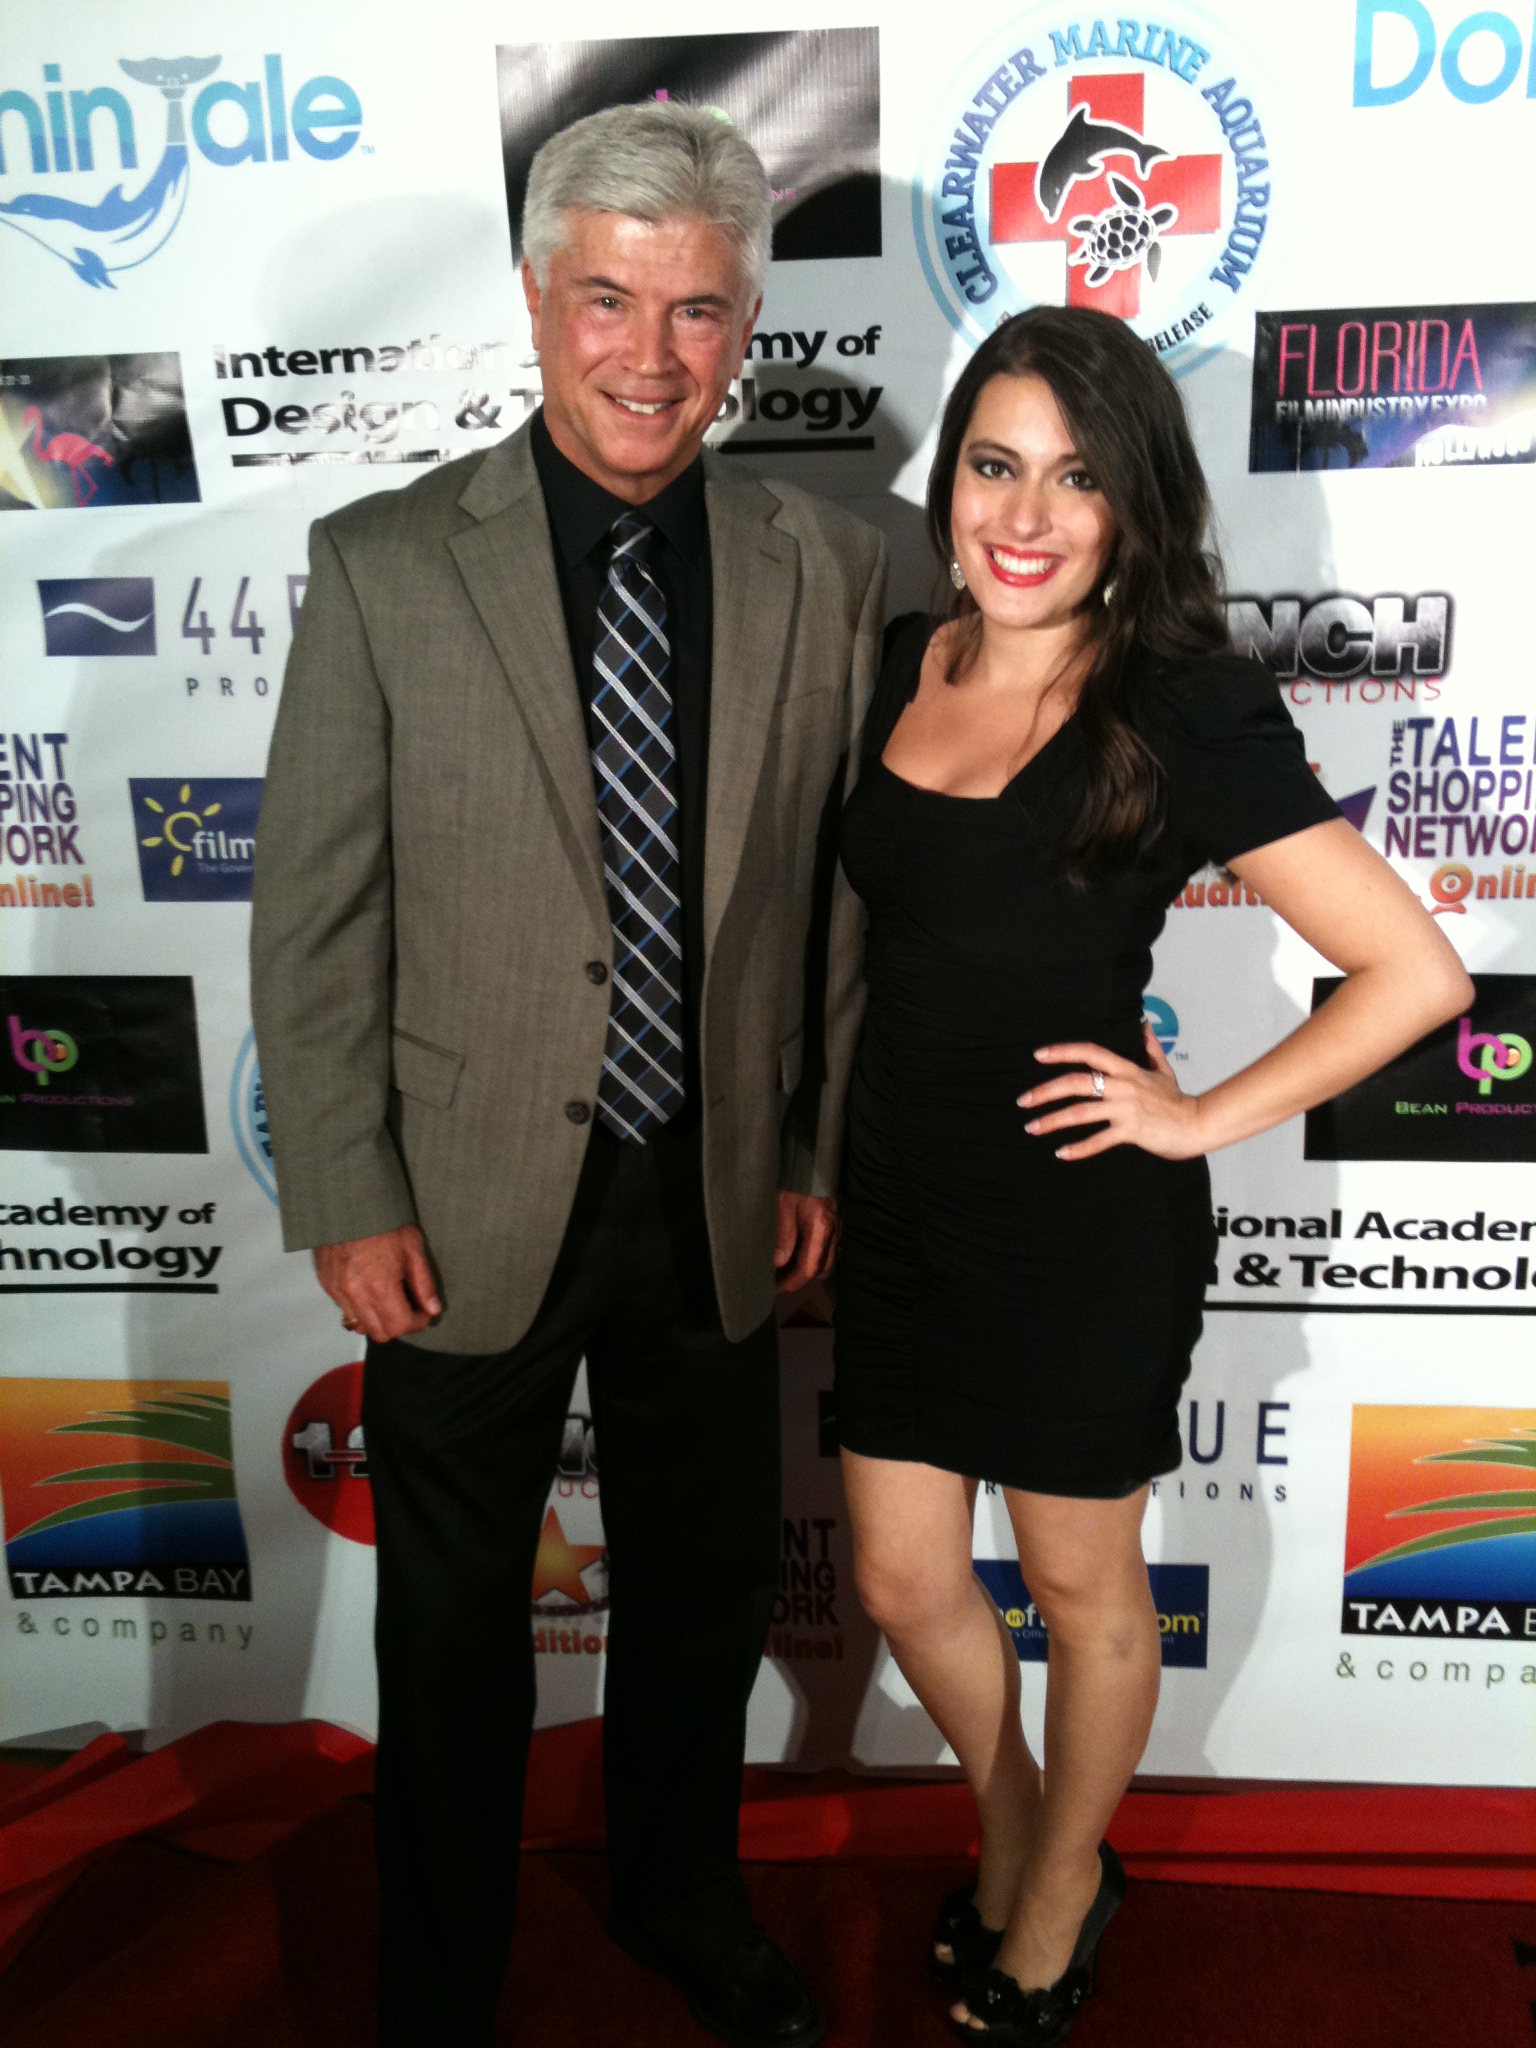 Florida Film Industry Expo gala event with Brianna Borello-Tampa-May 2013